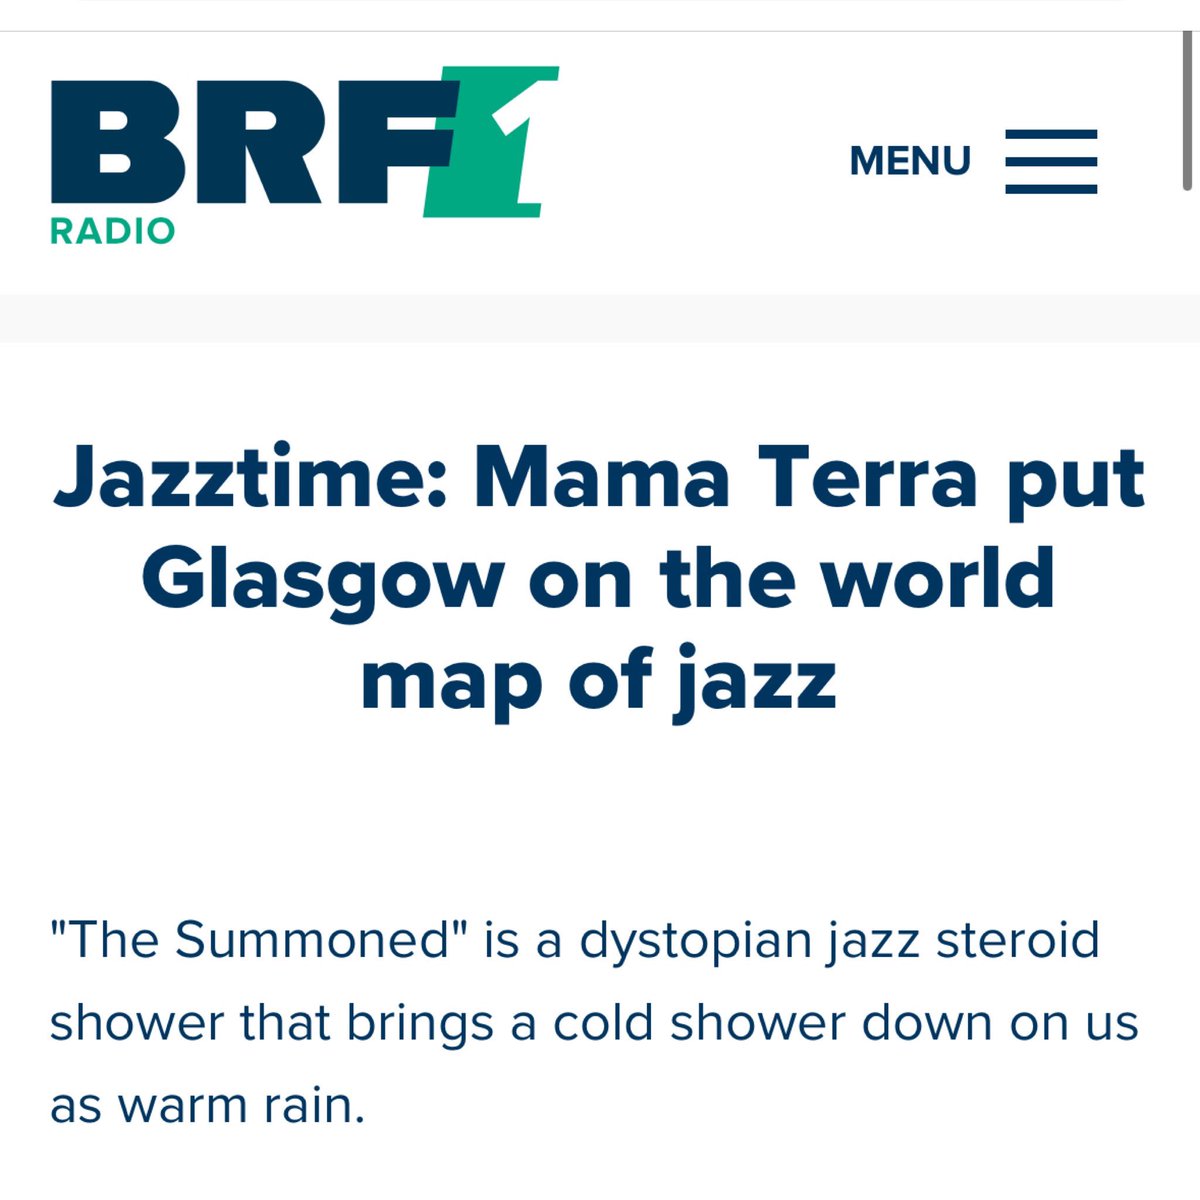 “The Summoned” is a dystopian jazz steroid shower that brings a cold shower down on us as warm rain.” One of my favourite lines about “The Summoned” album I’ve read. Thank you to #jazztime on #brf1 radio for the feature and review. Such kind words said about the album. 🙏